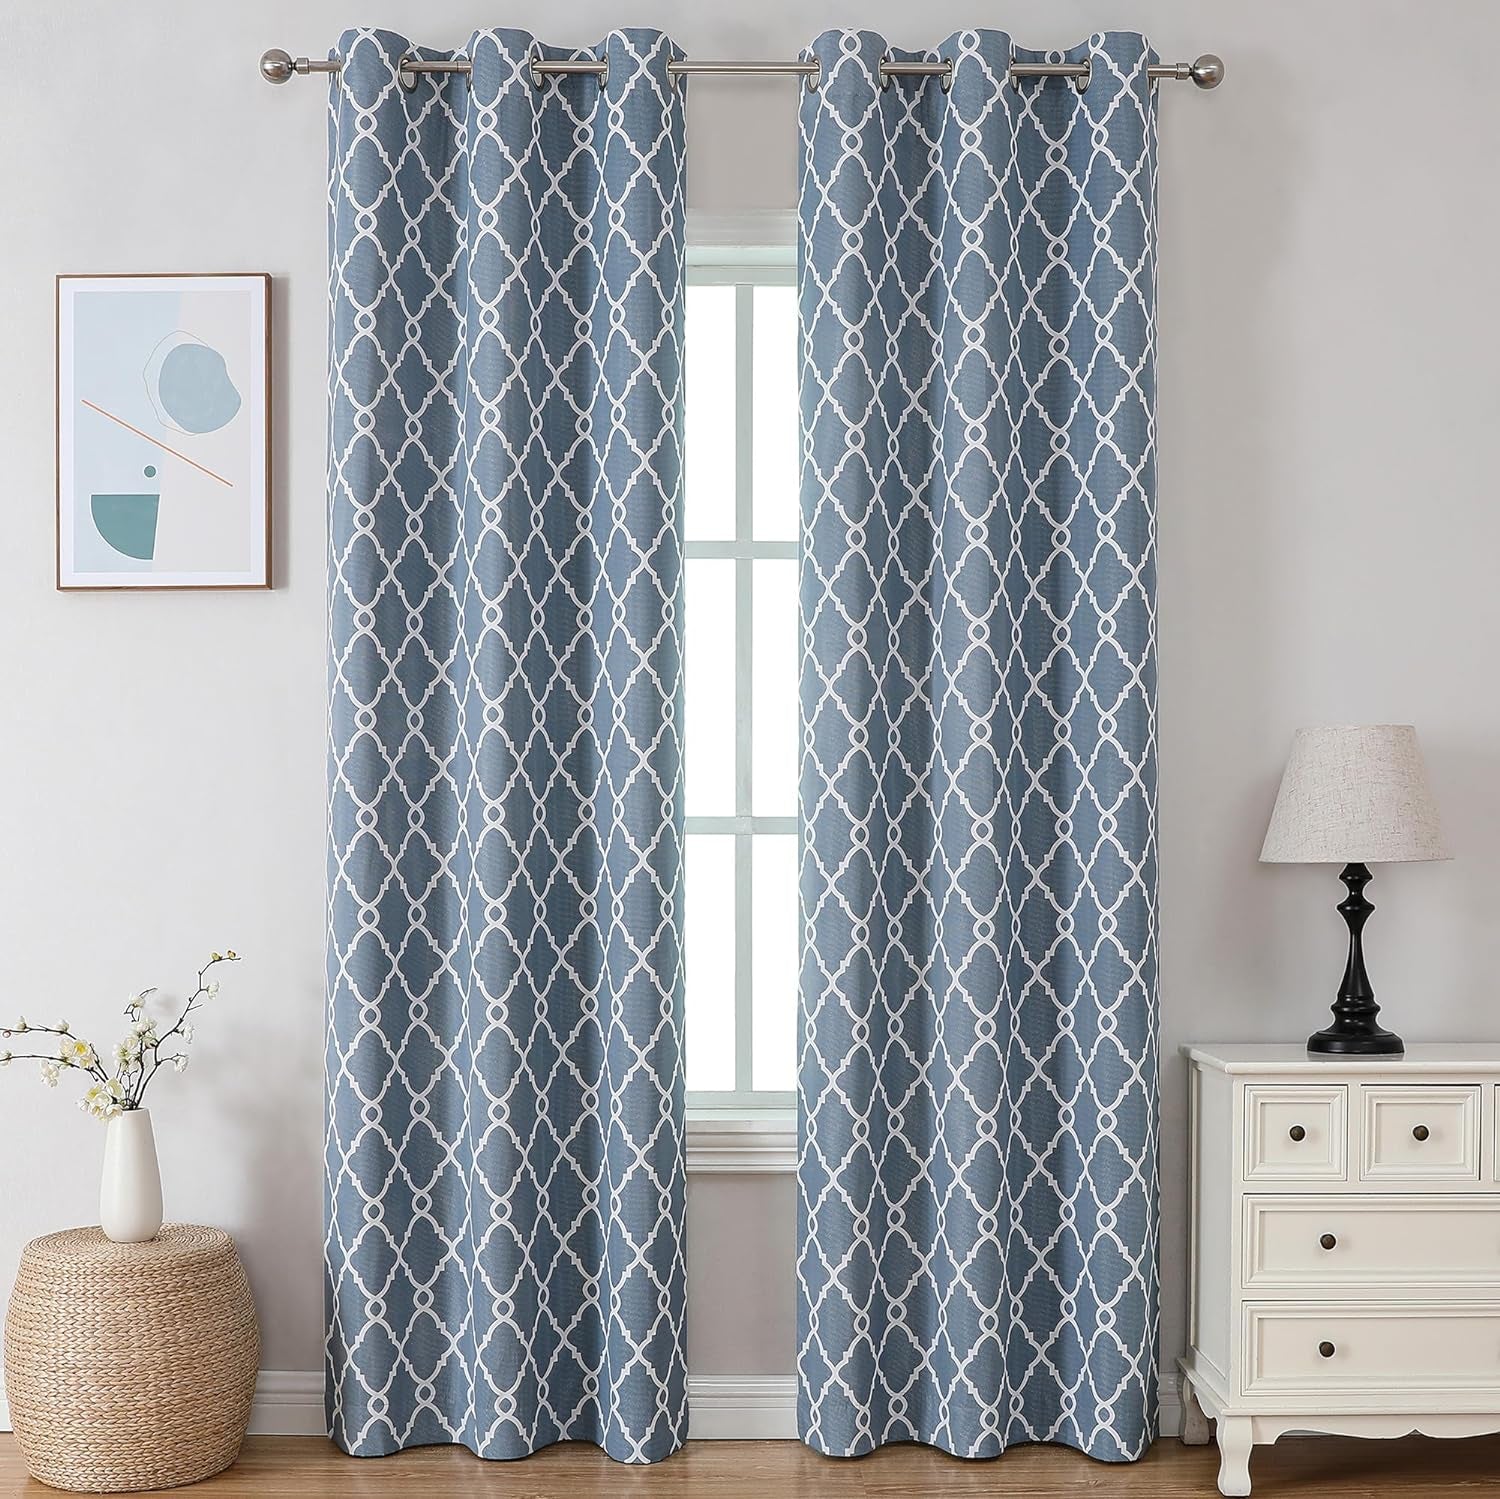 Piper 2 Panels Navy Blue Blackout Curtains 84 Inches Long, Fully Block Light Room Darkening Curtain/Panel/Drapes Grommet, Geometric Living Room Bedroom Farmhouse Window Treatment, 37X84 Inch